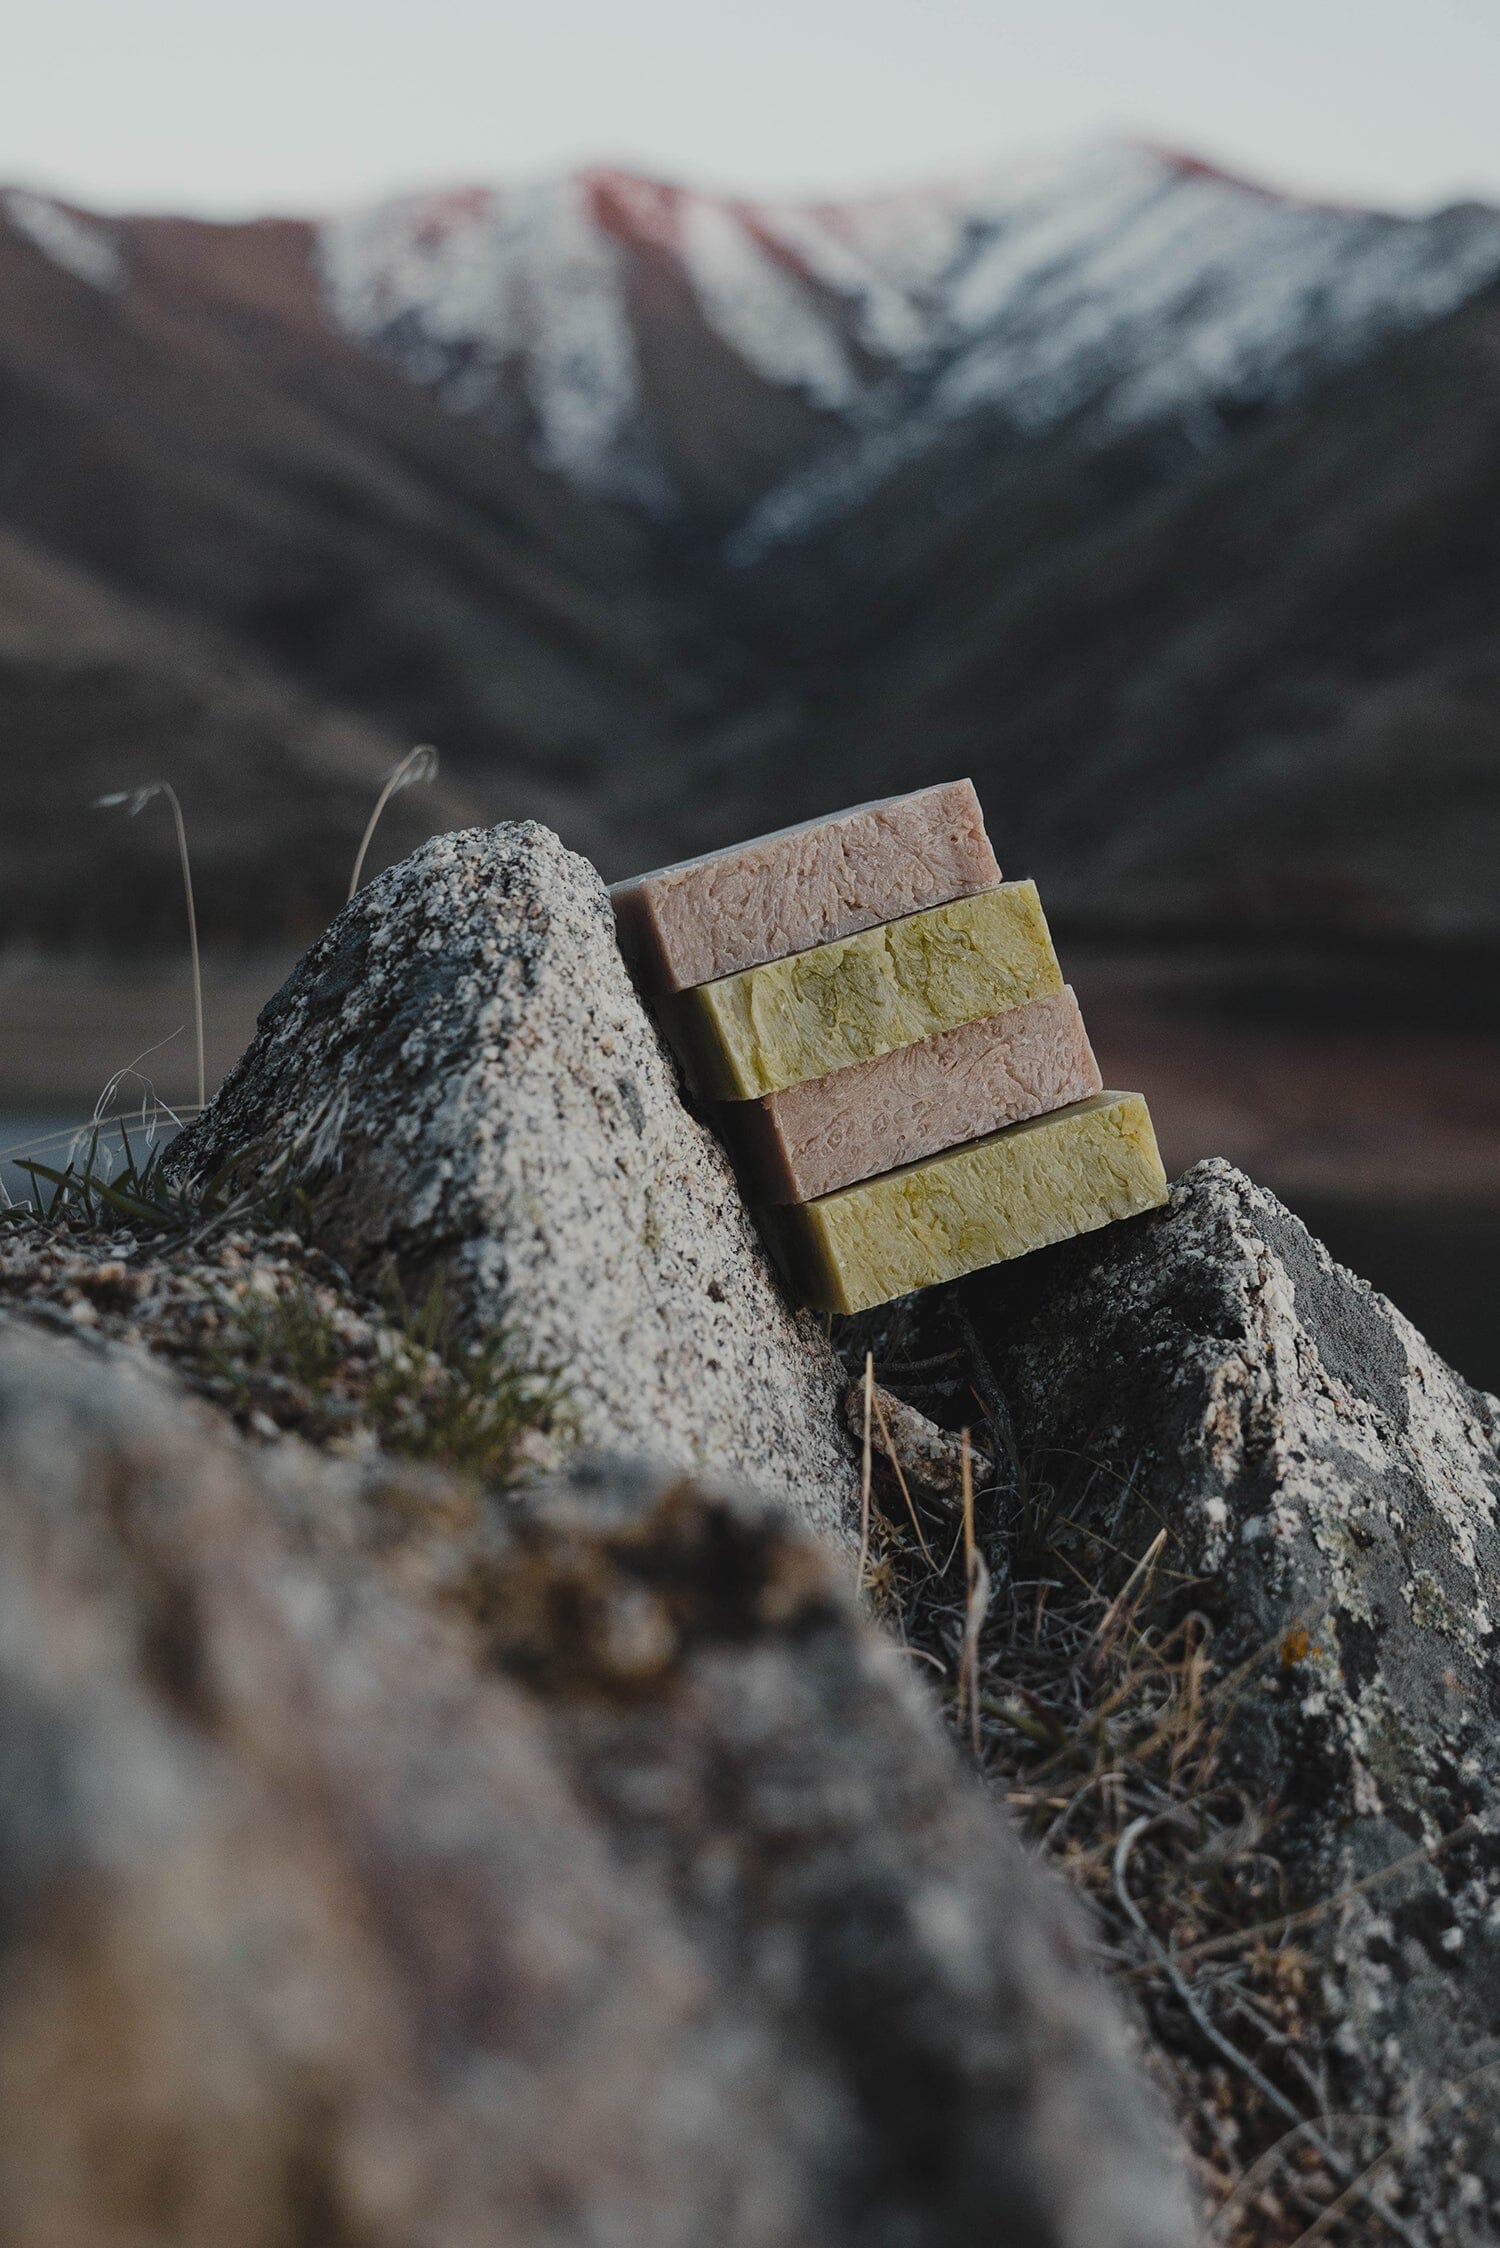 Iron Lion Soap's all-natural, cold processed, handmade bars of soap nestled in a mountainside.